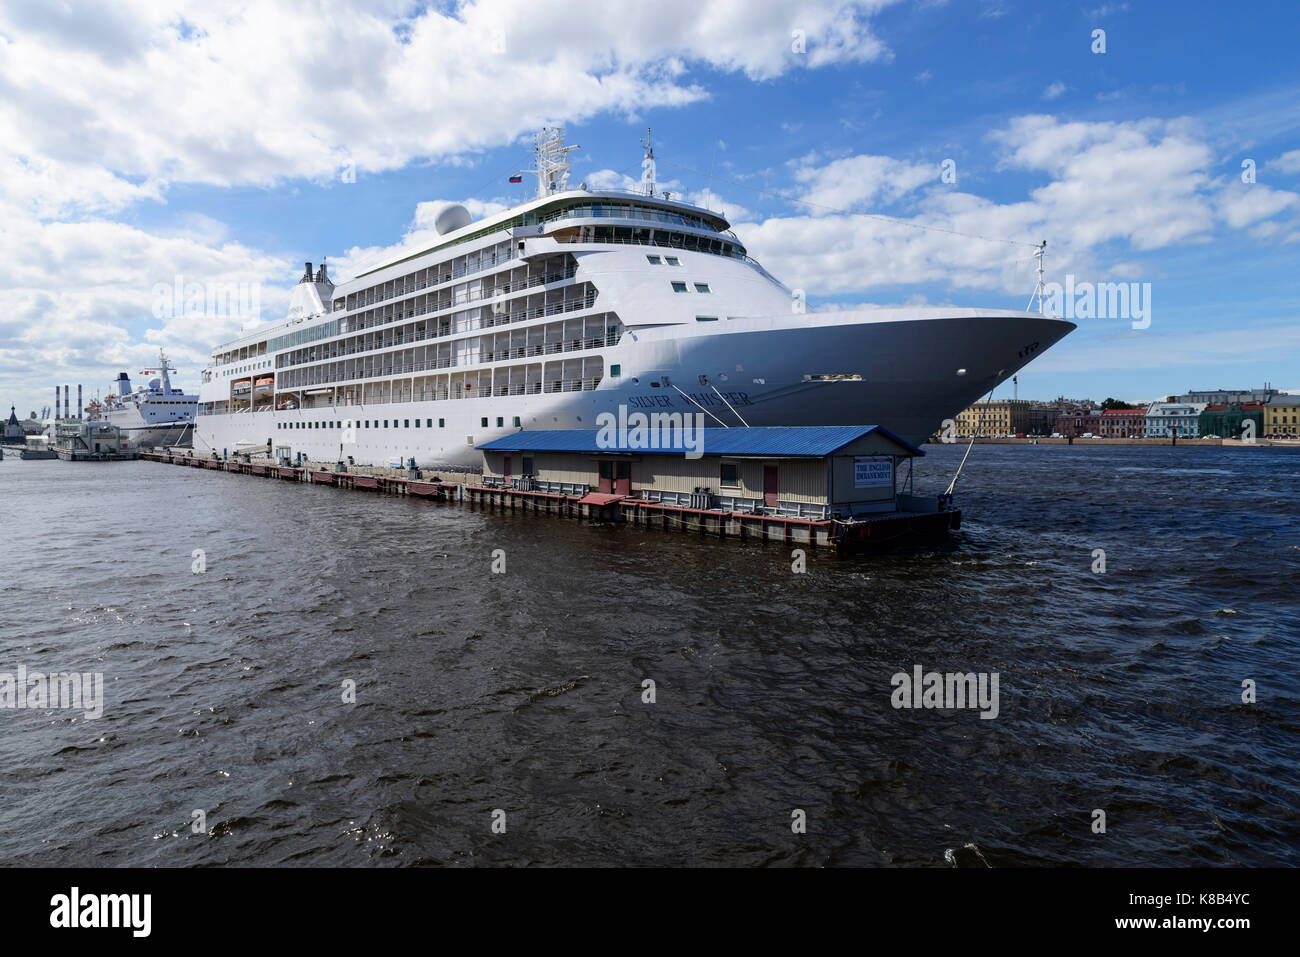 Saint-Petersburg, Russia - August 22, 2016: Large cruise ship 'Silver whisper' is docked in St. Petersburg August 22, 2016 Stock Photo